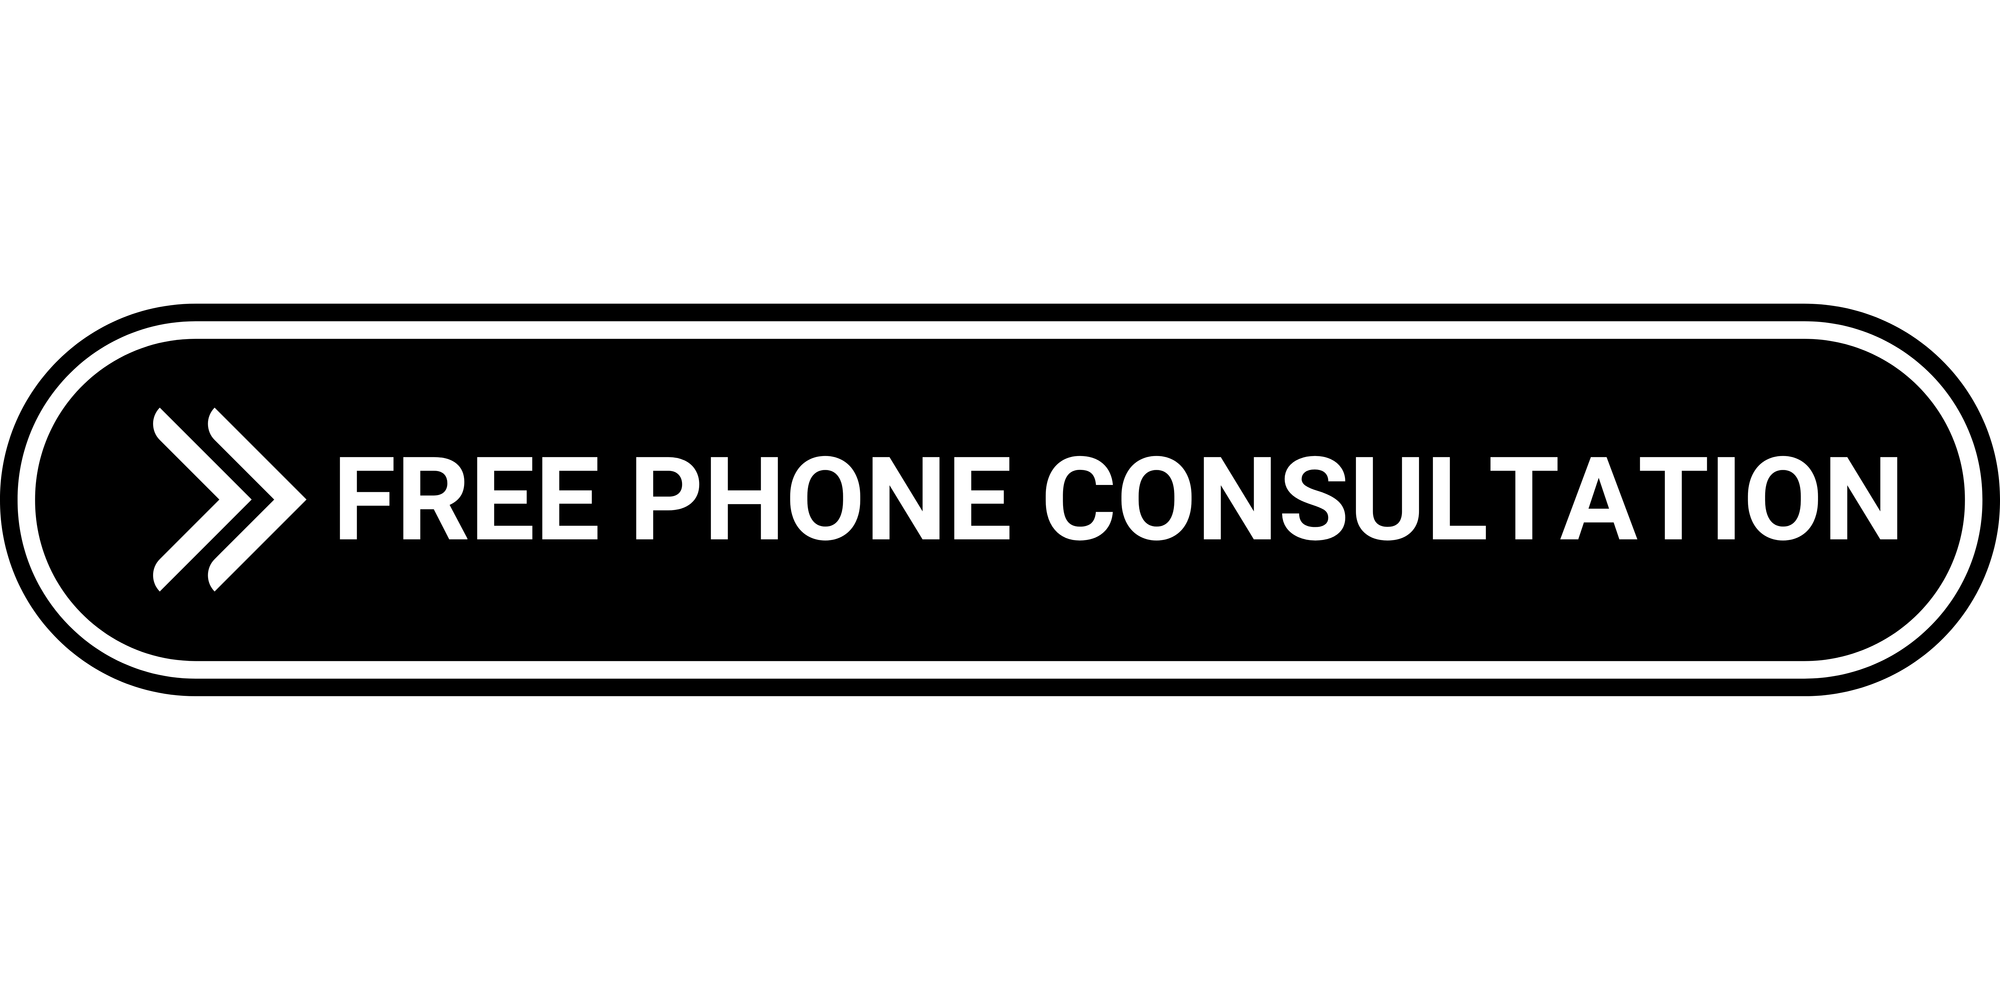 Click to schedule a free phone consultation button.